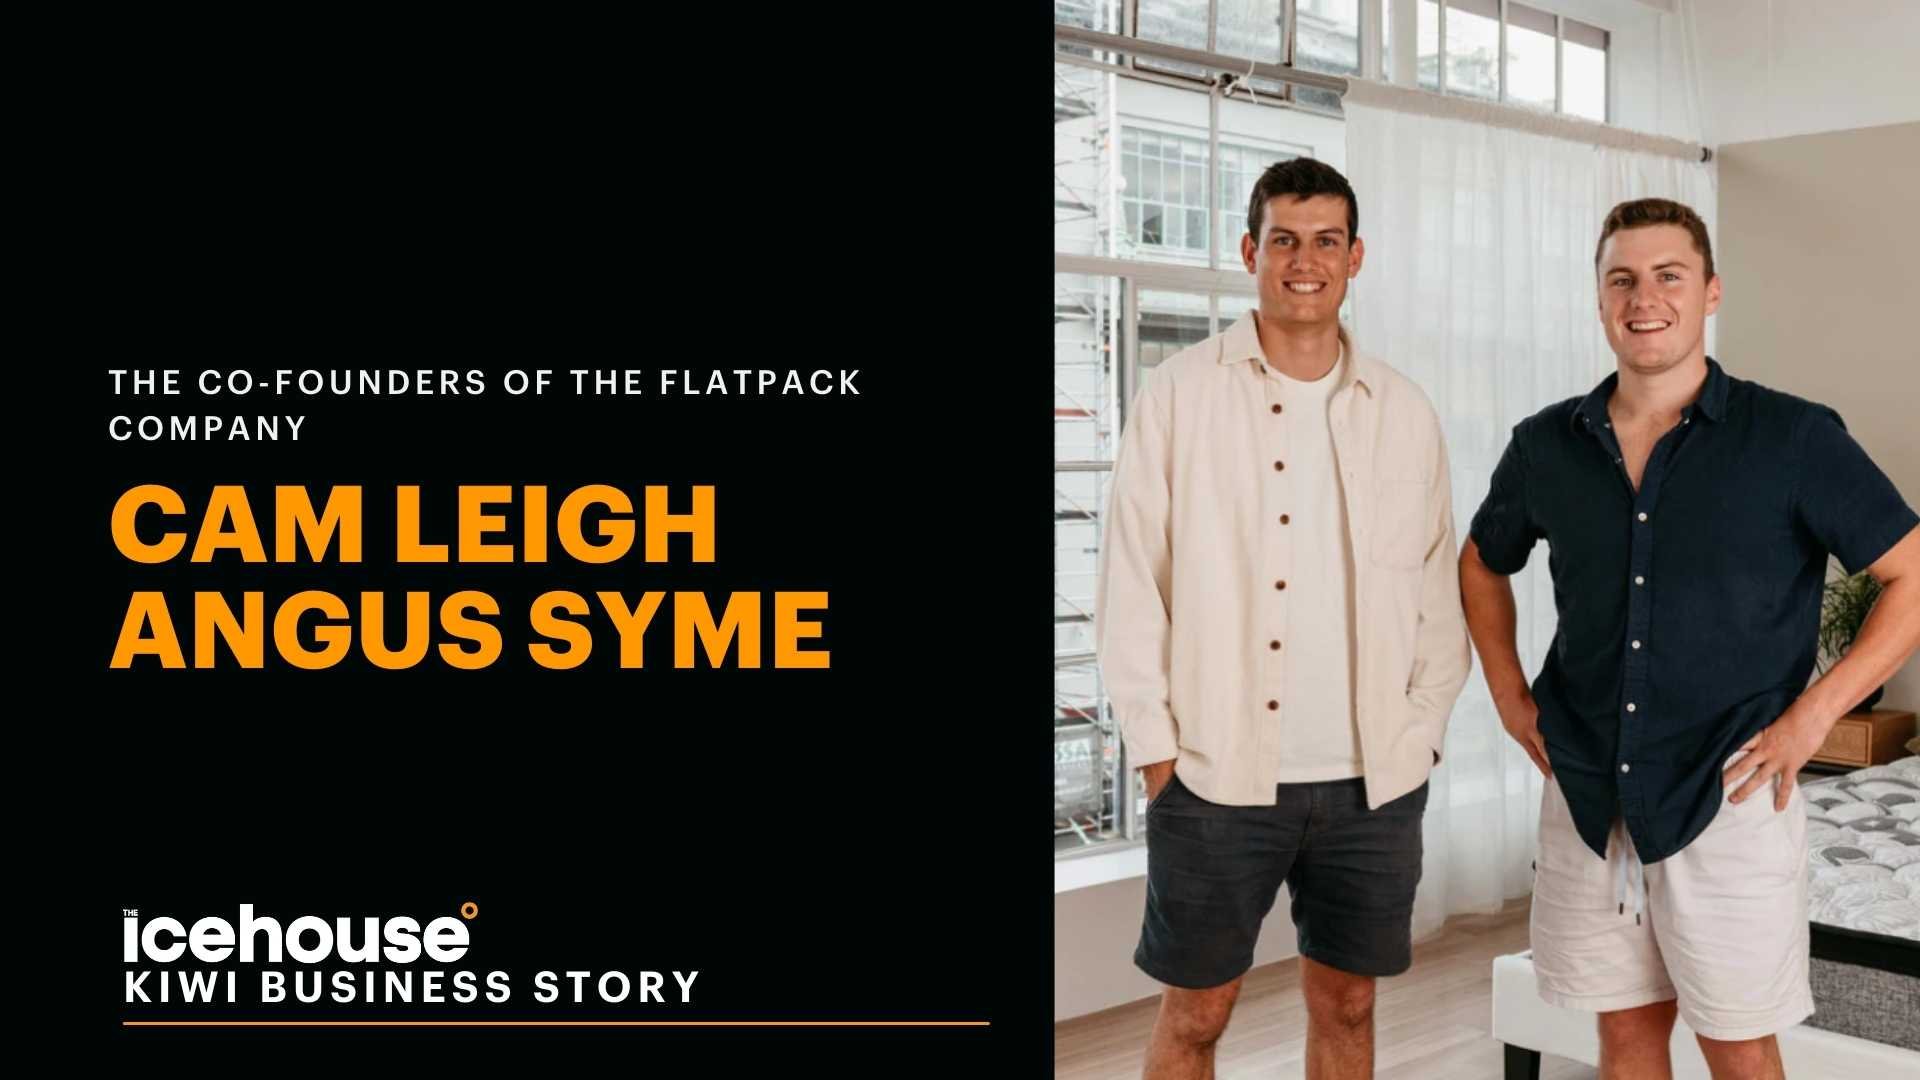 Angus Syme and Cam Leigh at The Flatpack Company_Kiwi Business Story_Image